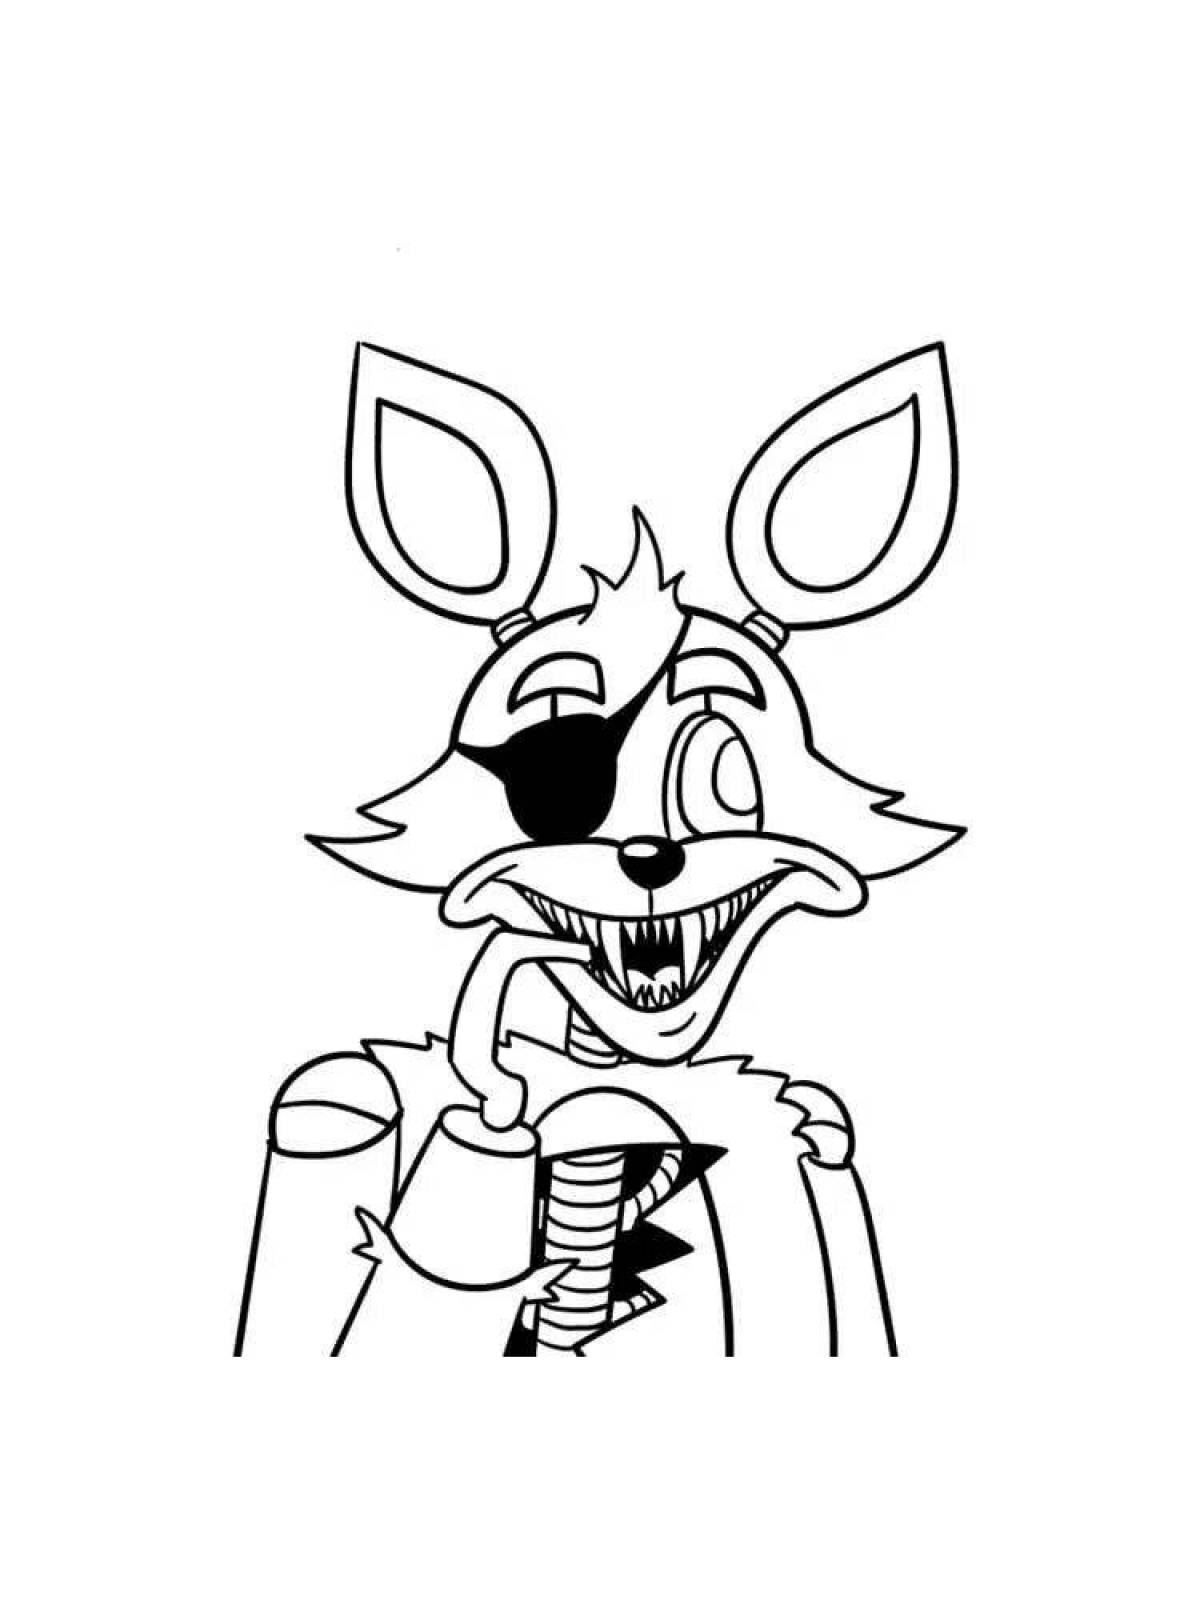 Foxy boo playful coloring page